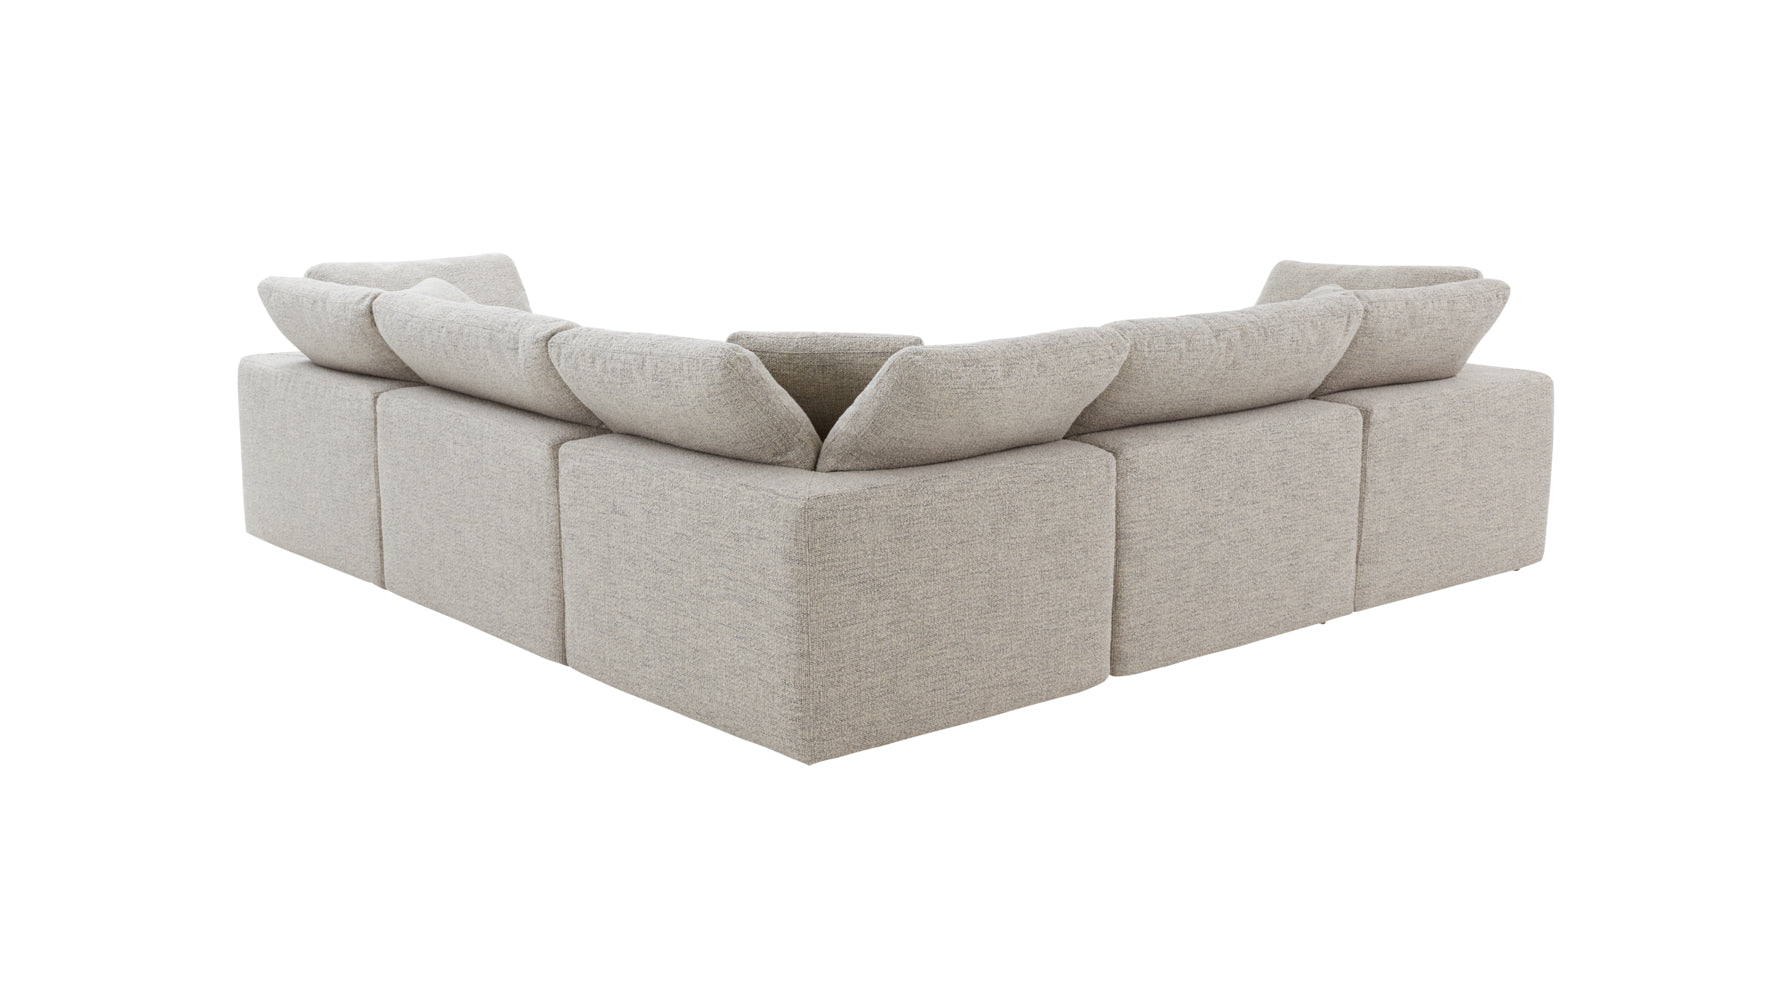 Movie Night™ 5-Piece Modular Sectional Closed, Large, Oatmeal - Image 8